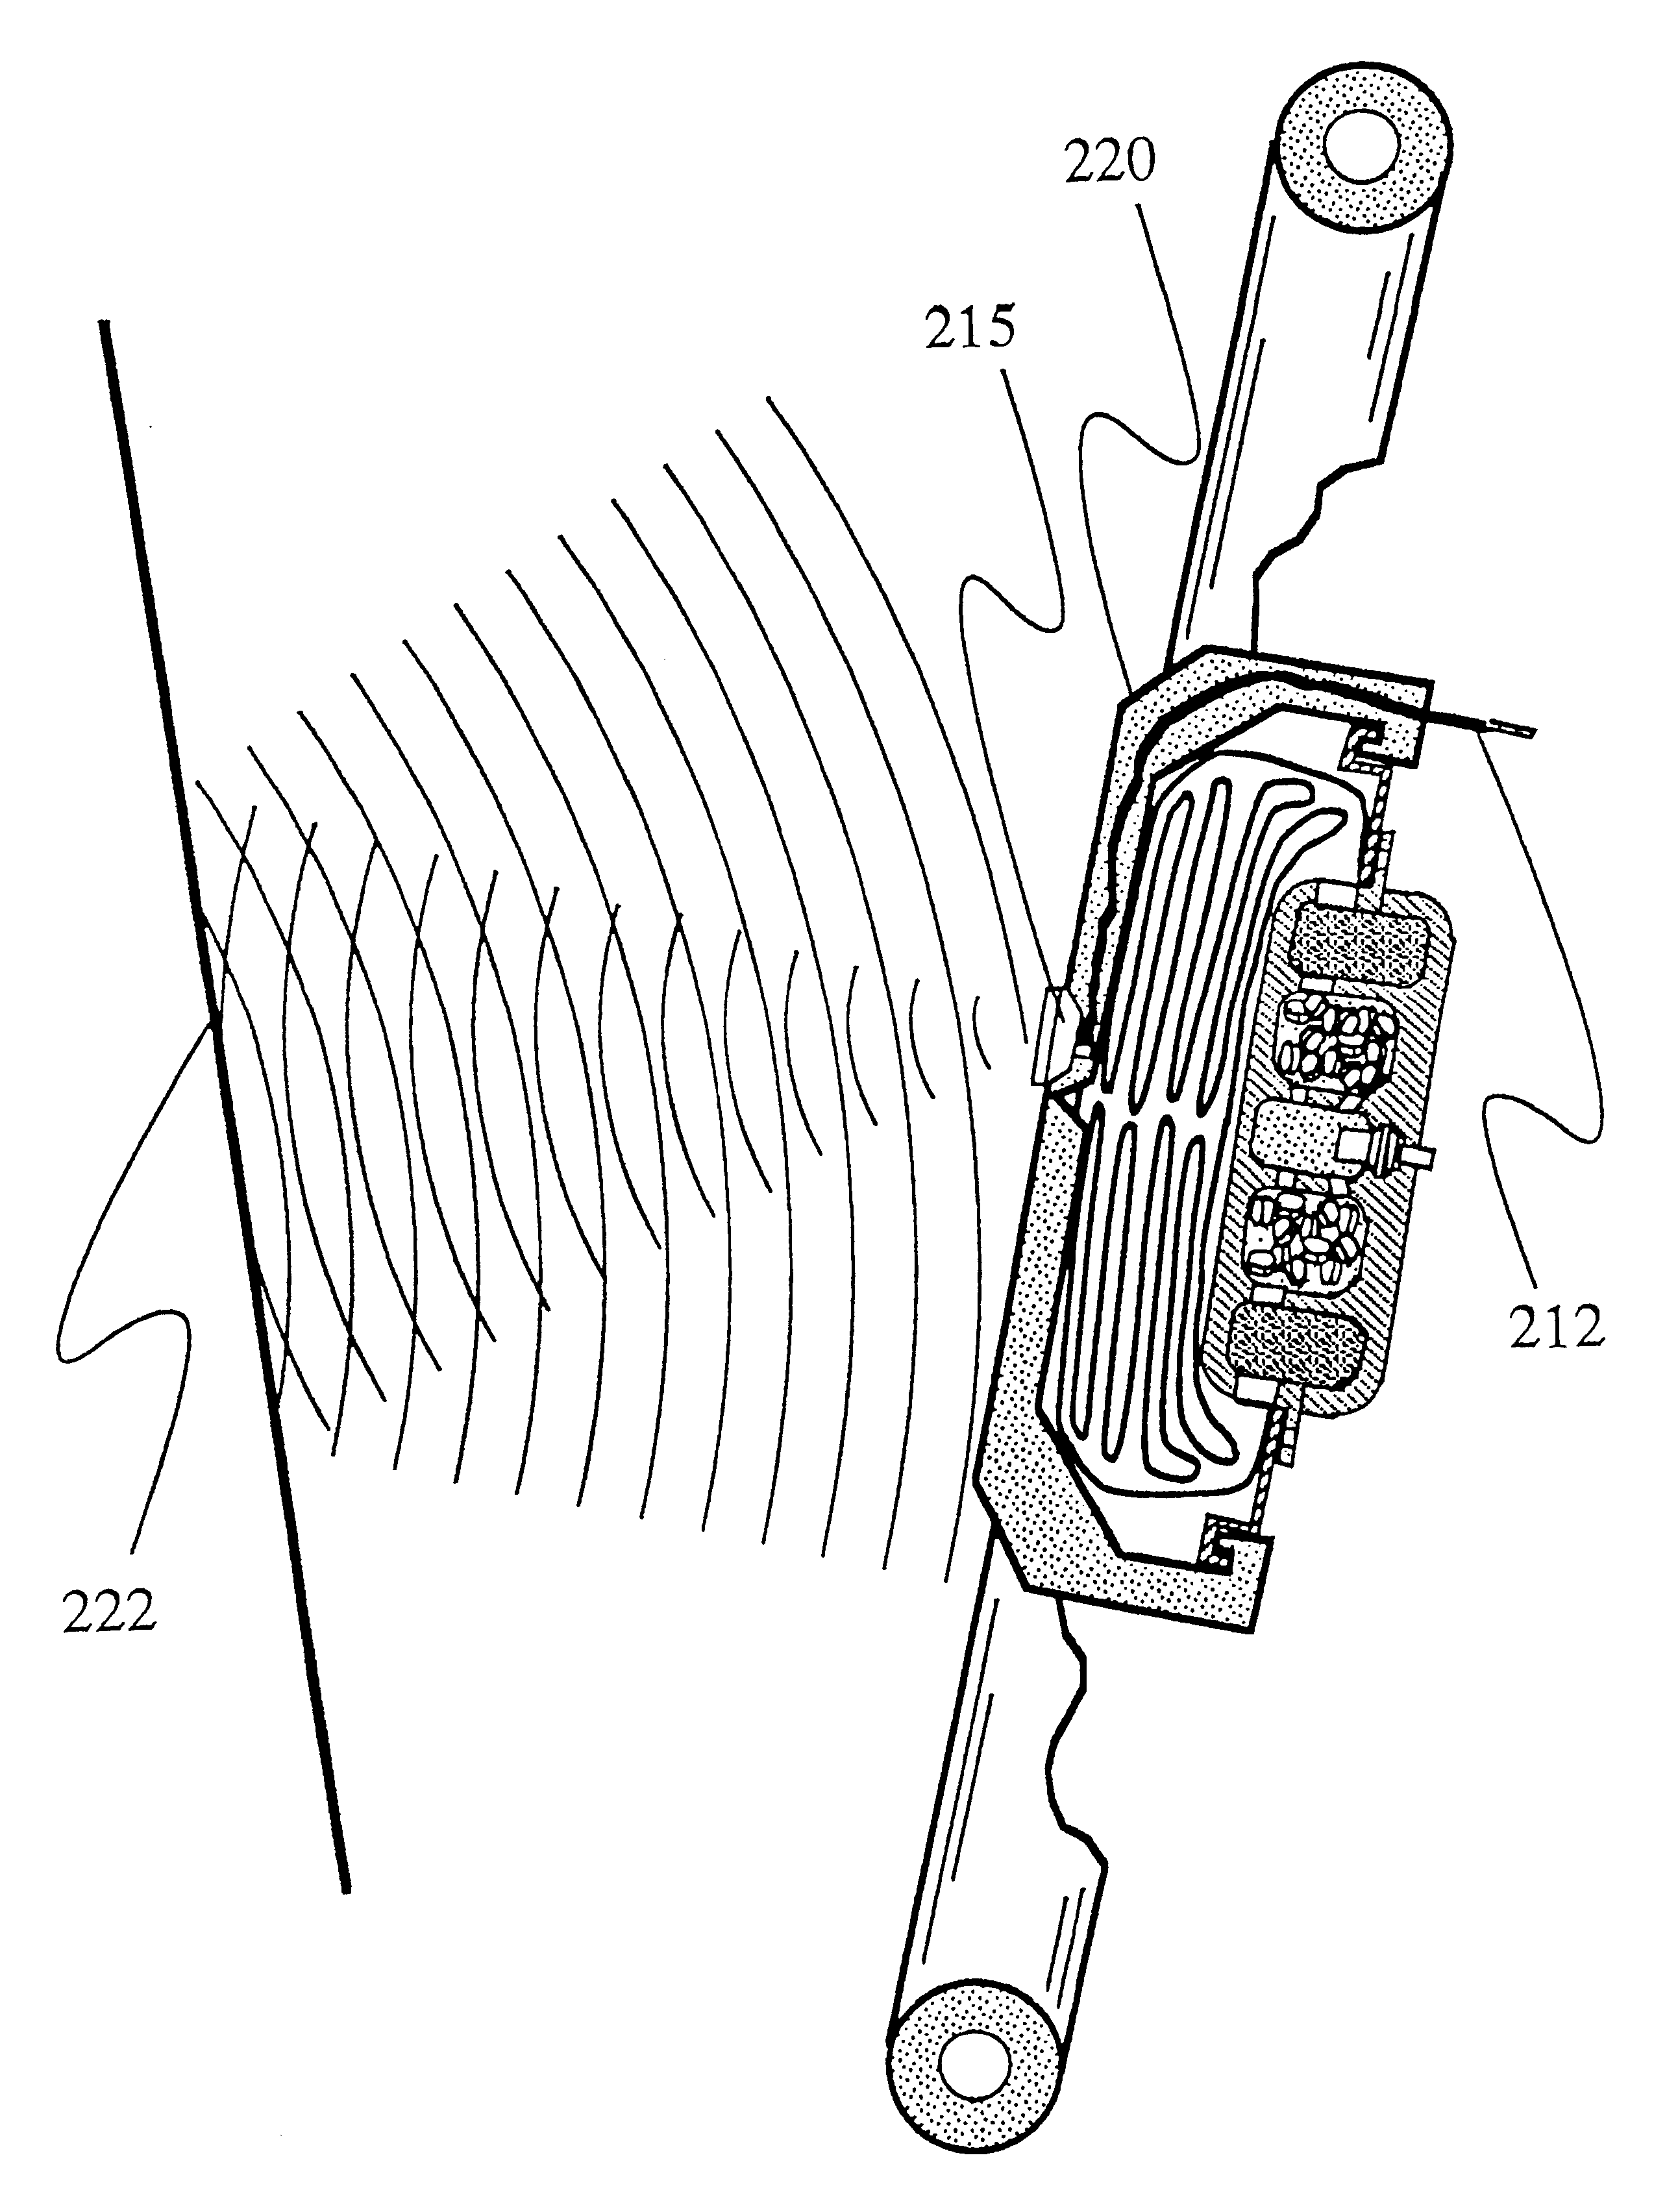 Method for controlling deployment of an occupant protection device